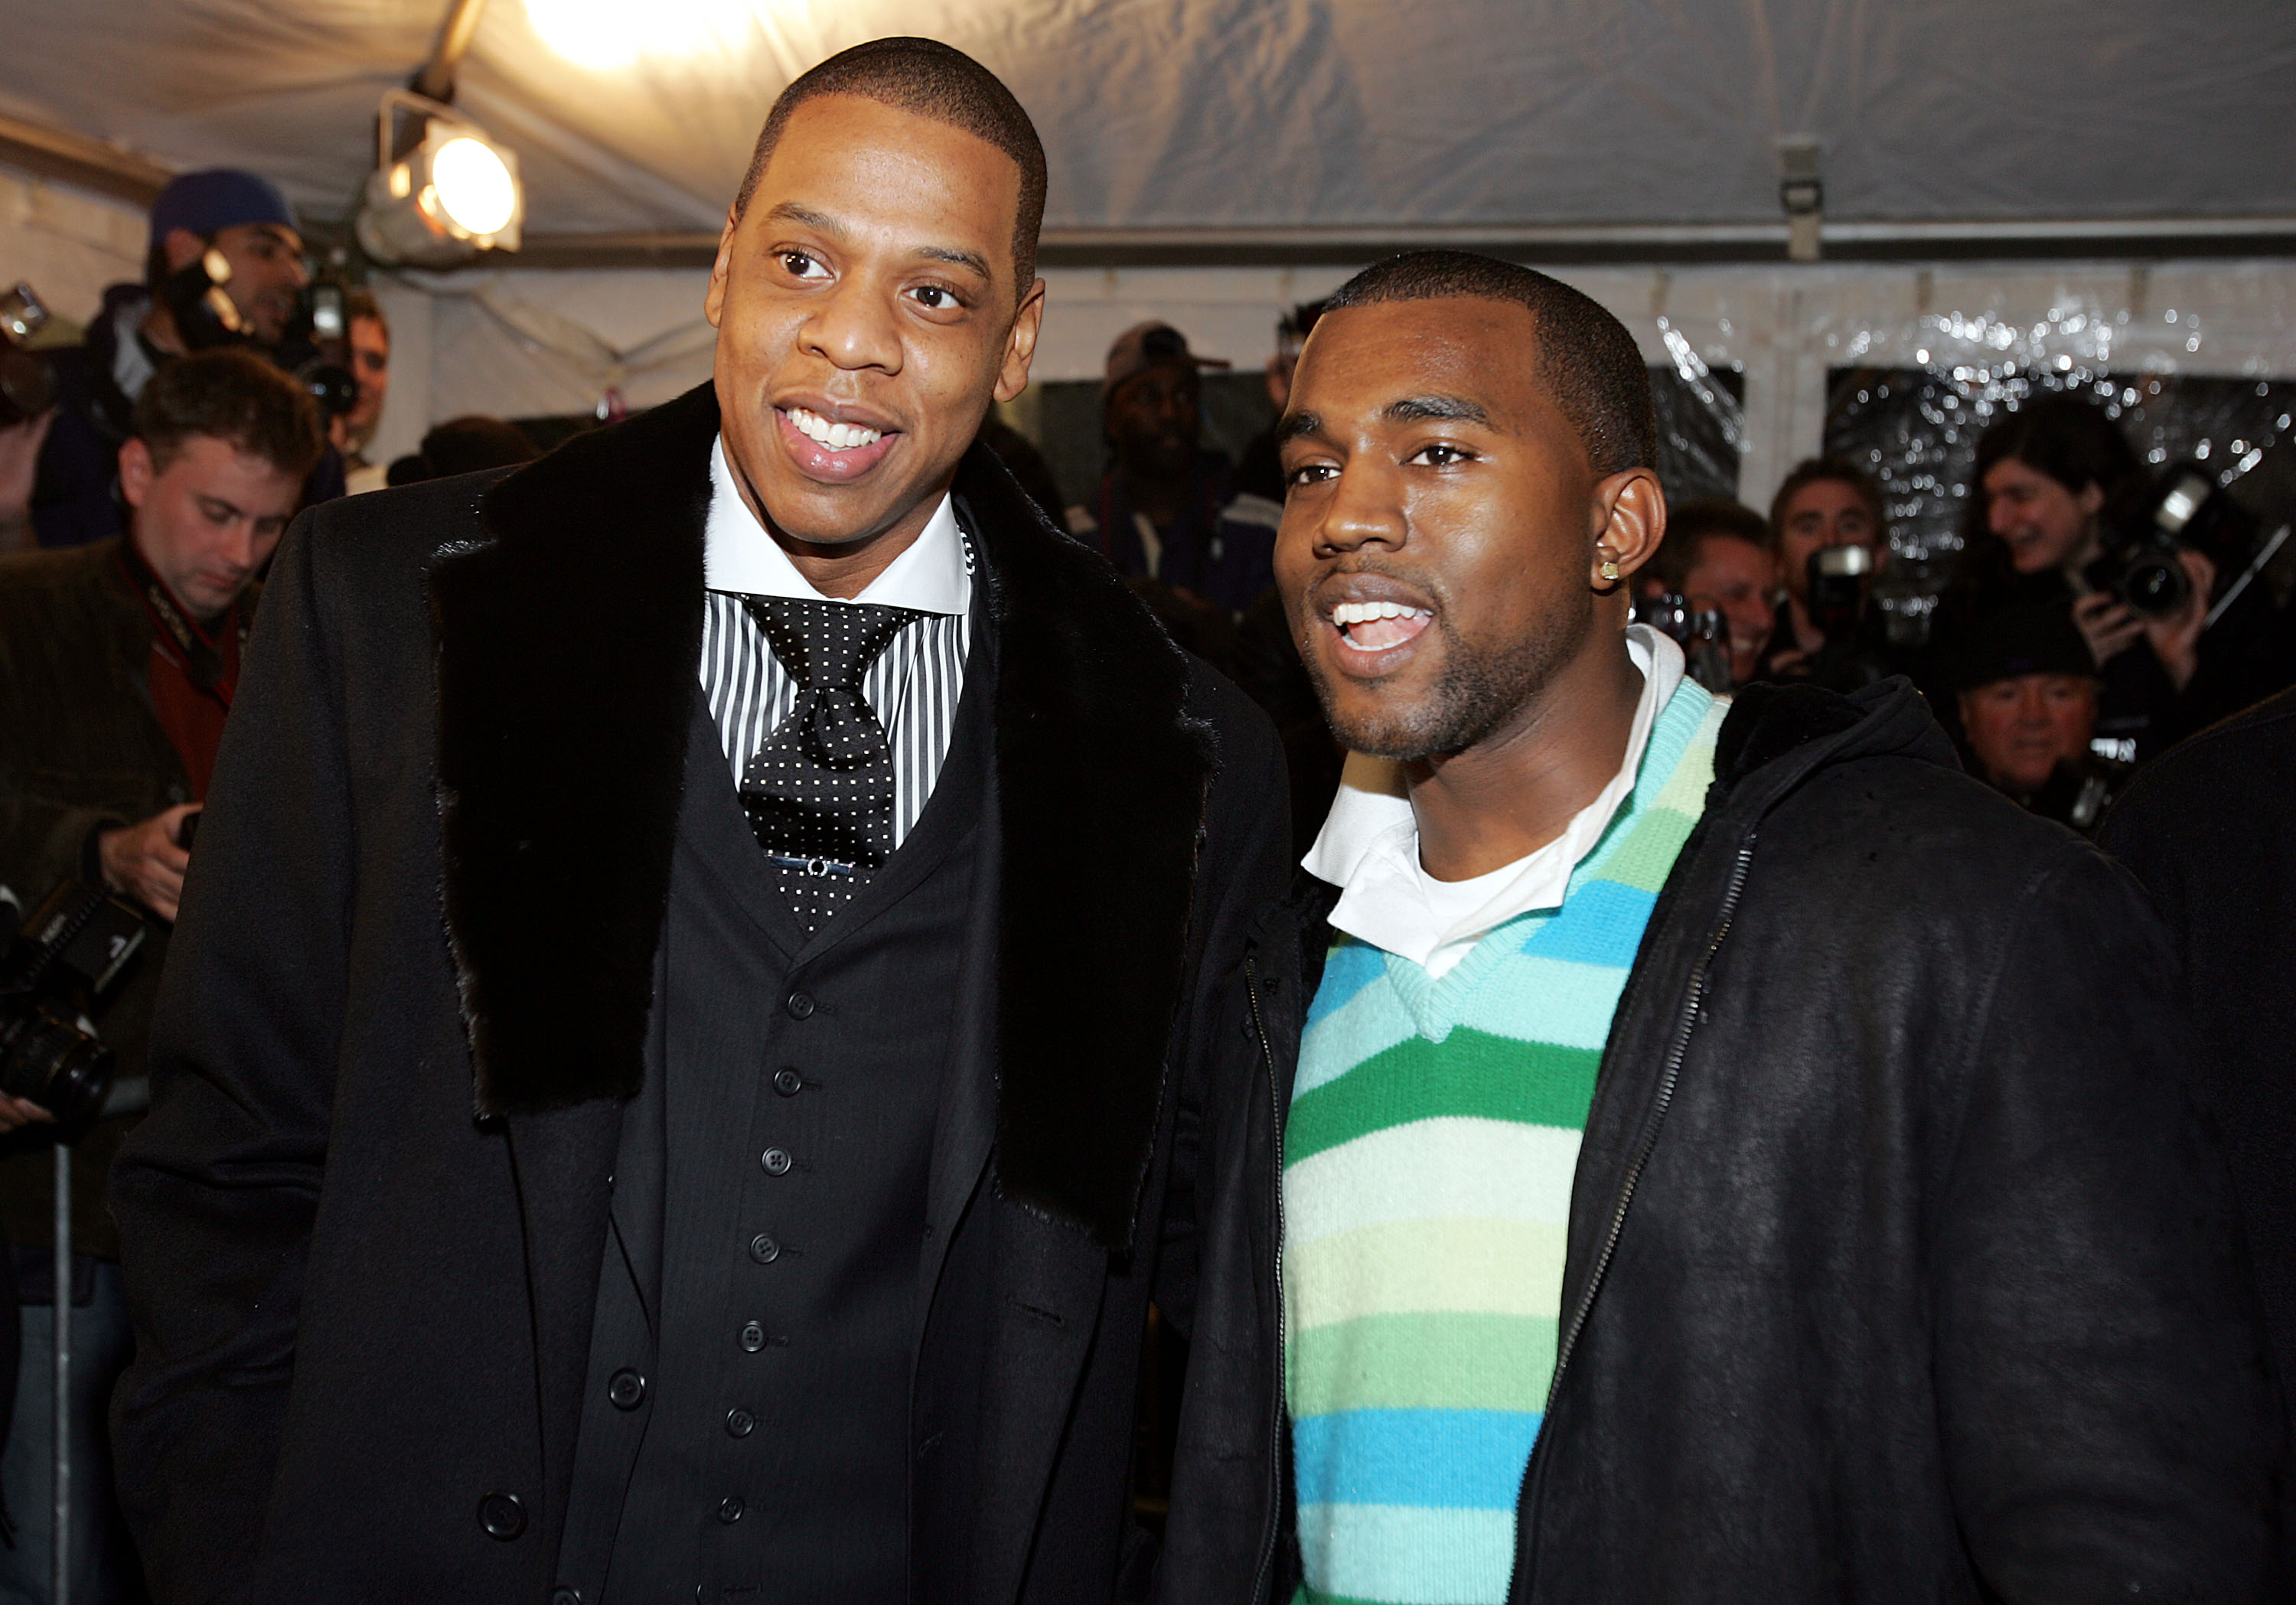 jay-z and kanye west never let me down